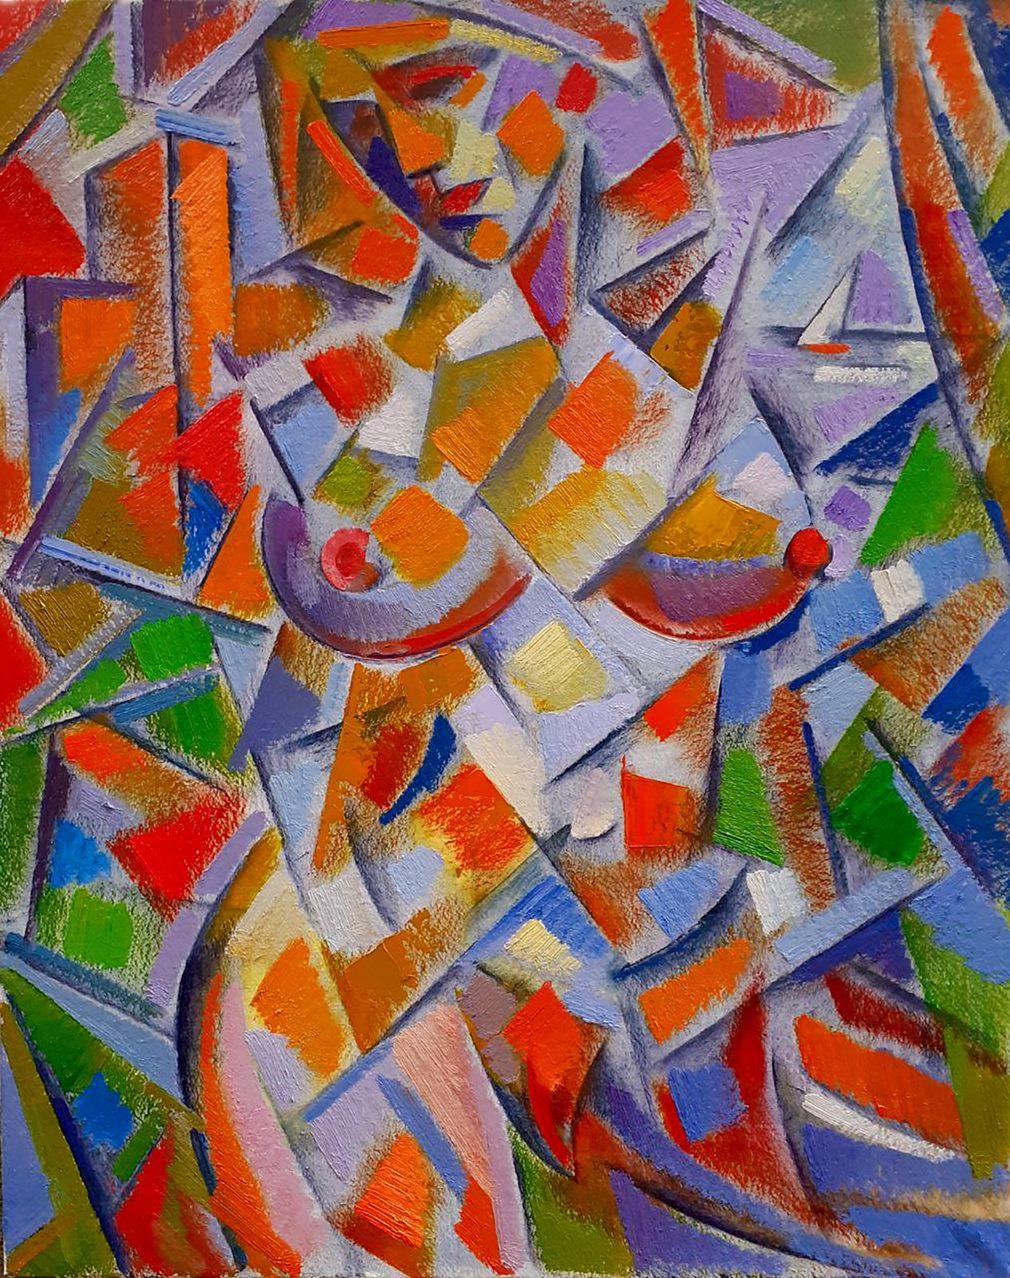 Peter Tovpev Figurative Painting - Nude Woman, Cubism, Pablo Picasso, Original oil Painting, Ready to Hang